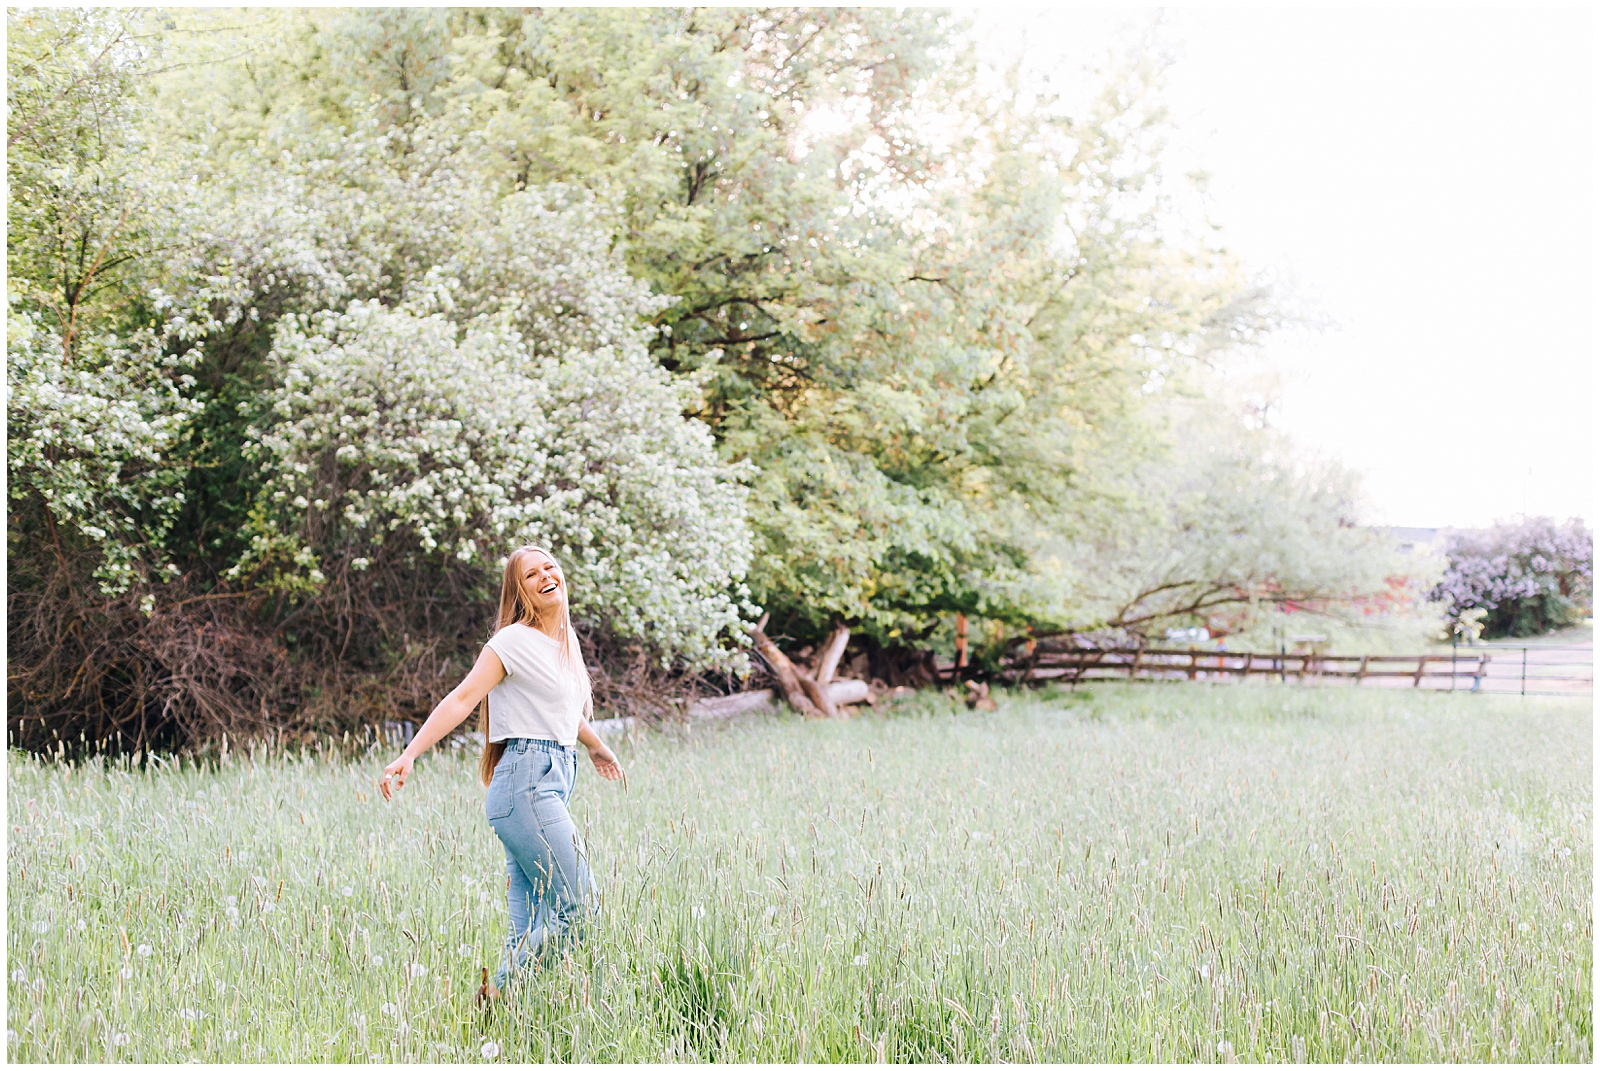 Senior Photos in Green Meadow with Rustic Fence